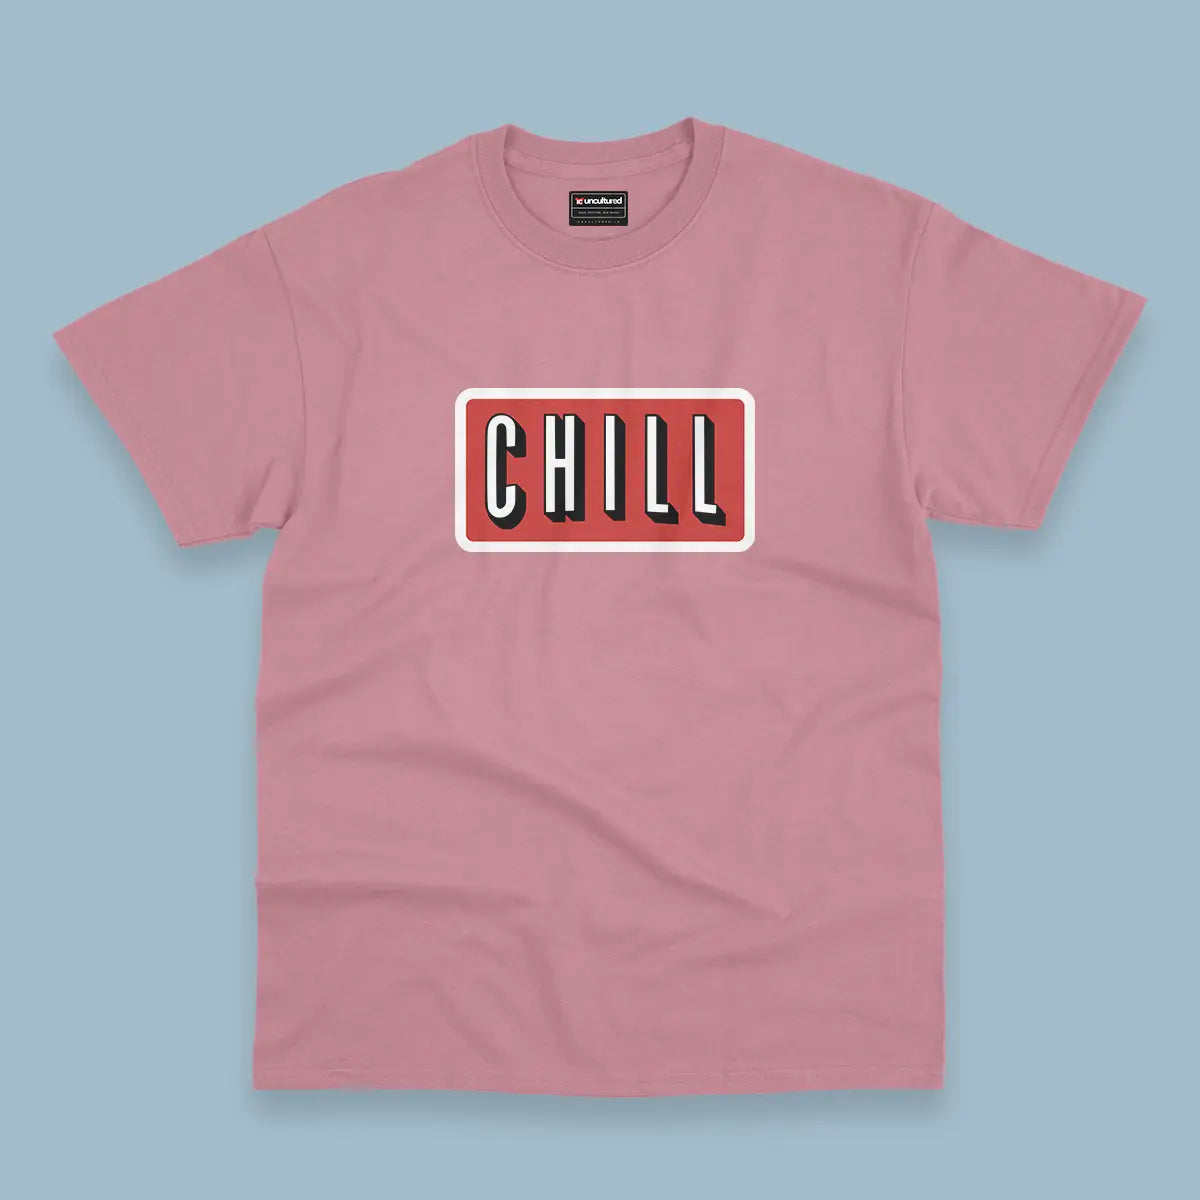 Chill - Oversized